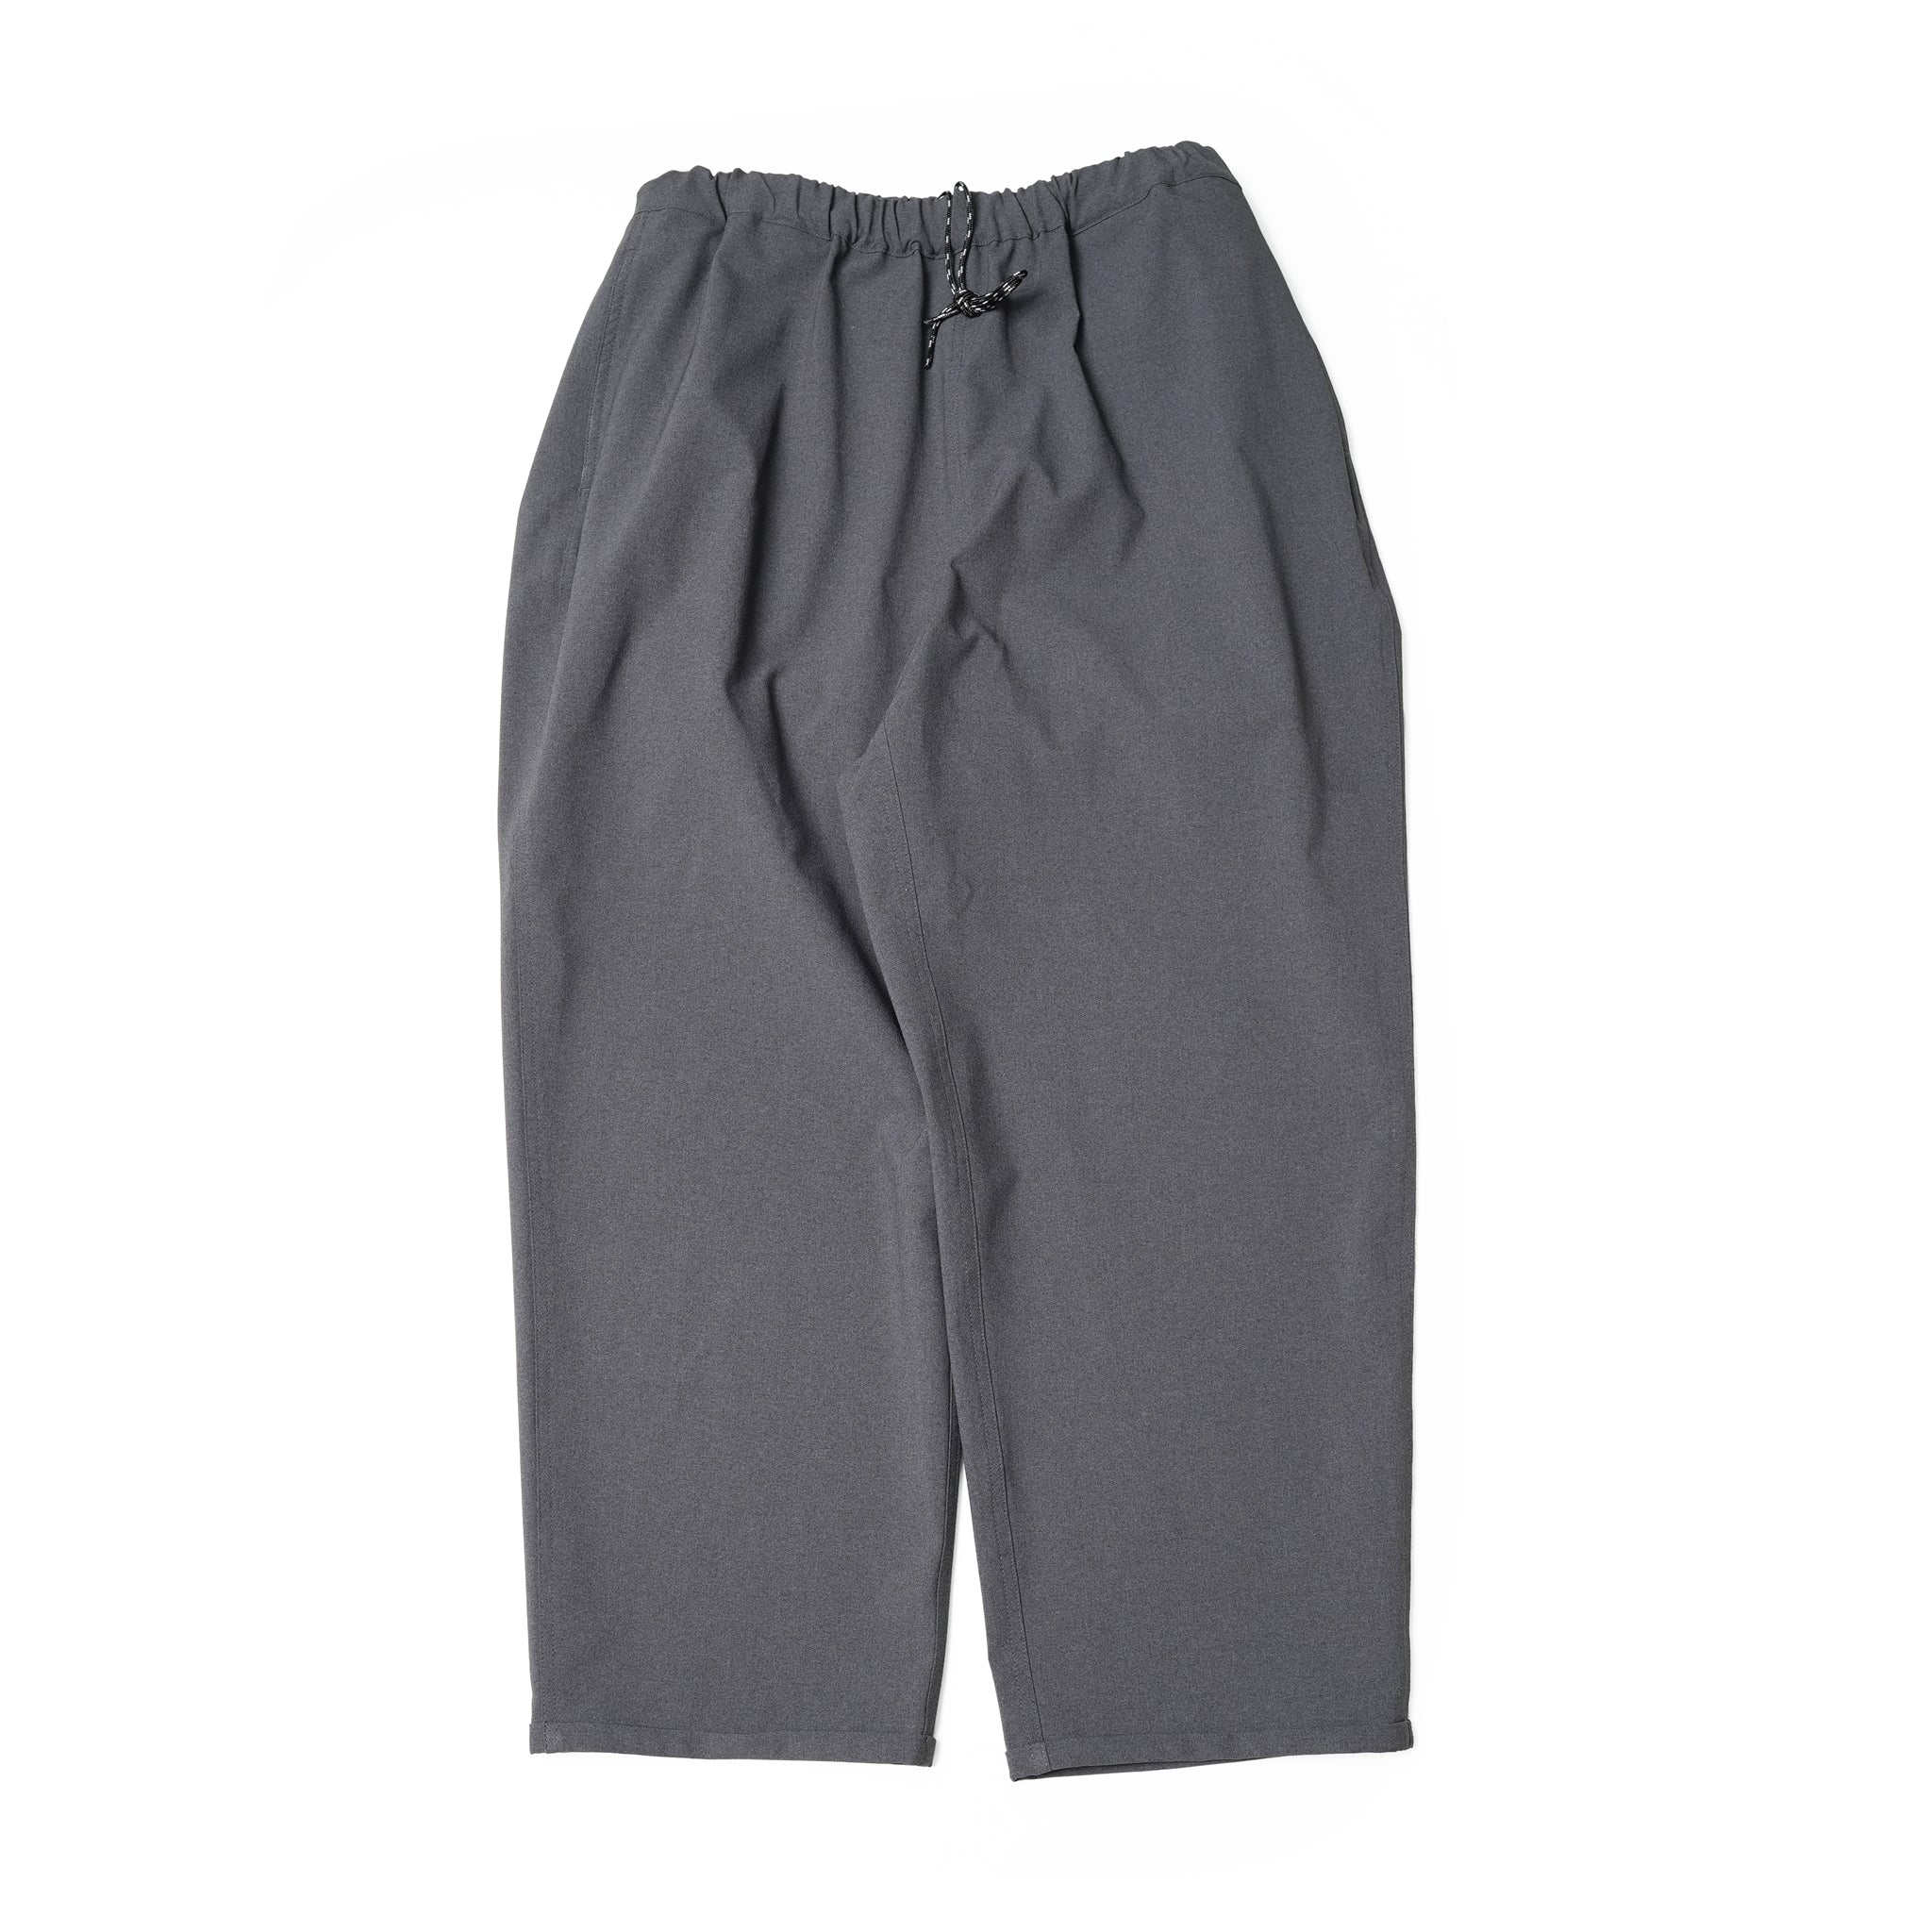 No:PH24FW-001_Charcol | Name:P.H. M.EASY PANTS | Color:Charcol【POWDERHORN MOUNTAINEERING_パウダーホーンマウンテニアリング】【入荷予定アイテム・入荷連絡可能】